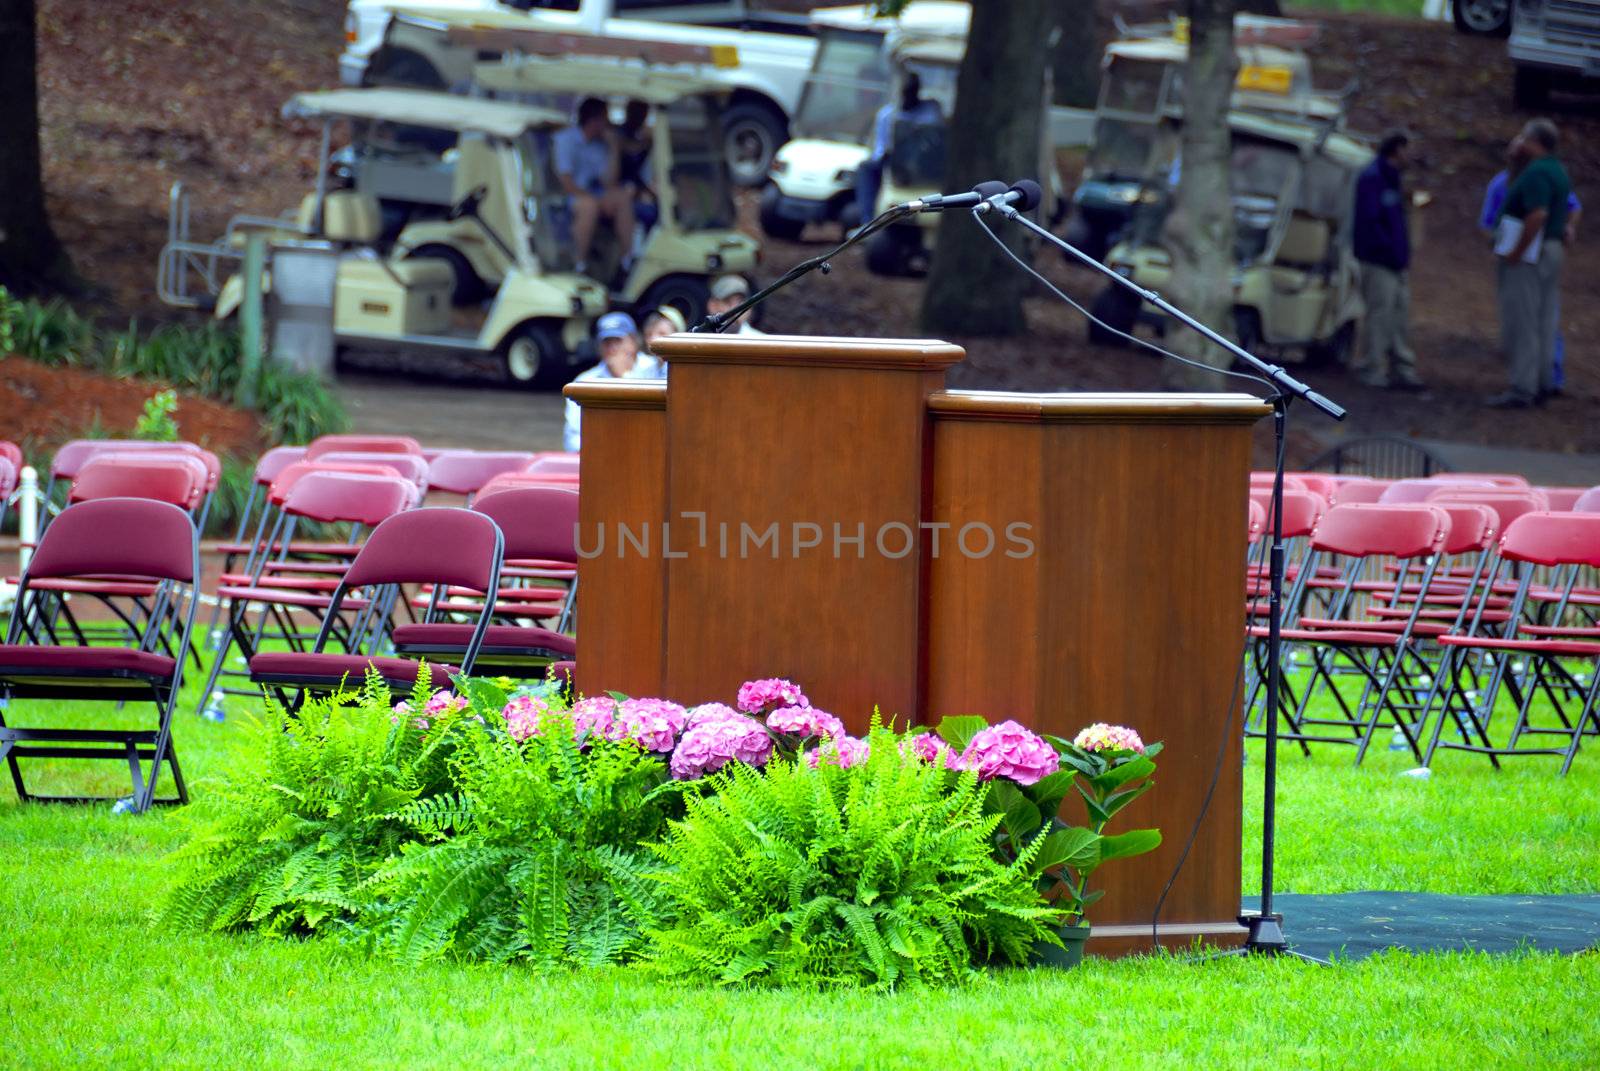 A podium set up to present diploma to students